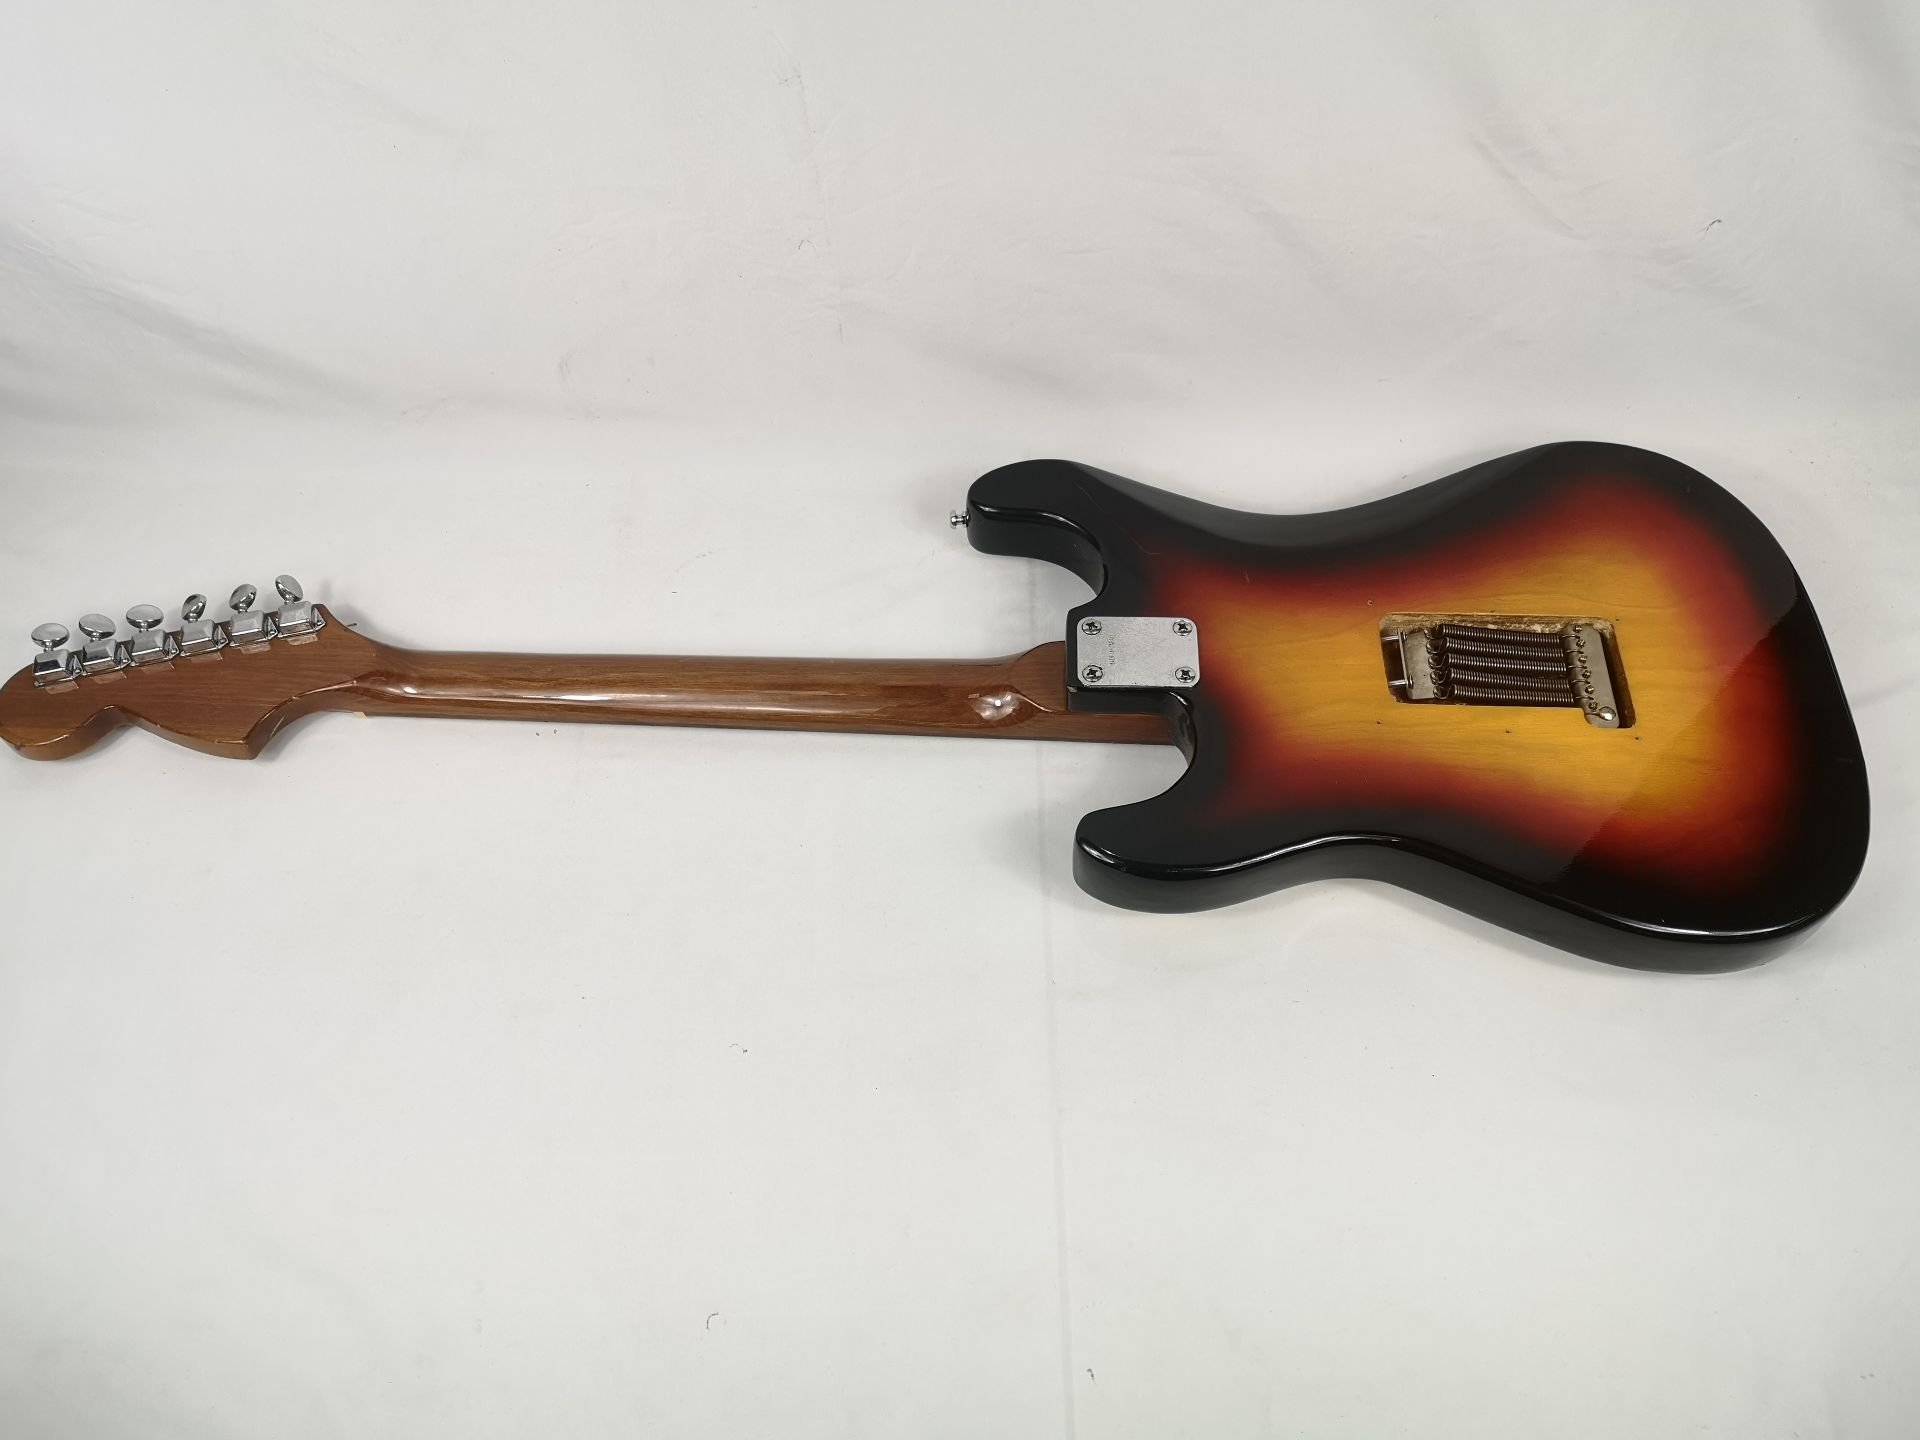 Sunbo electric guitar in fitted hard case - Image 6 of 8